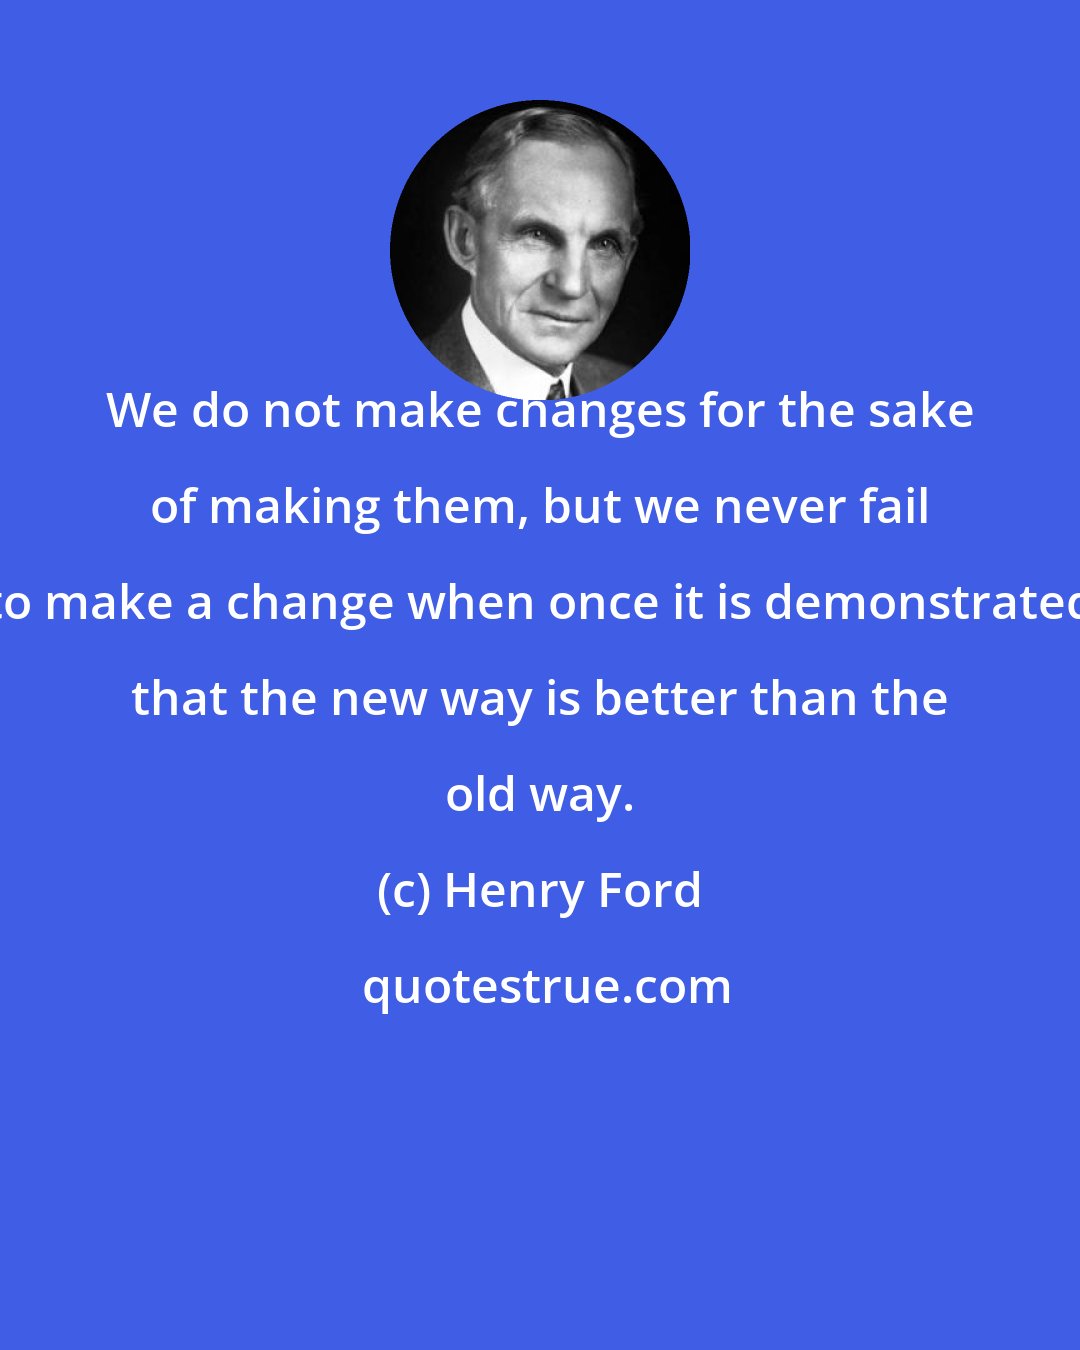 Henry Ford: We do not make changes for the sake of making them, but we never fail to make a change when once it is demonstrated that the new way is better than the old way.